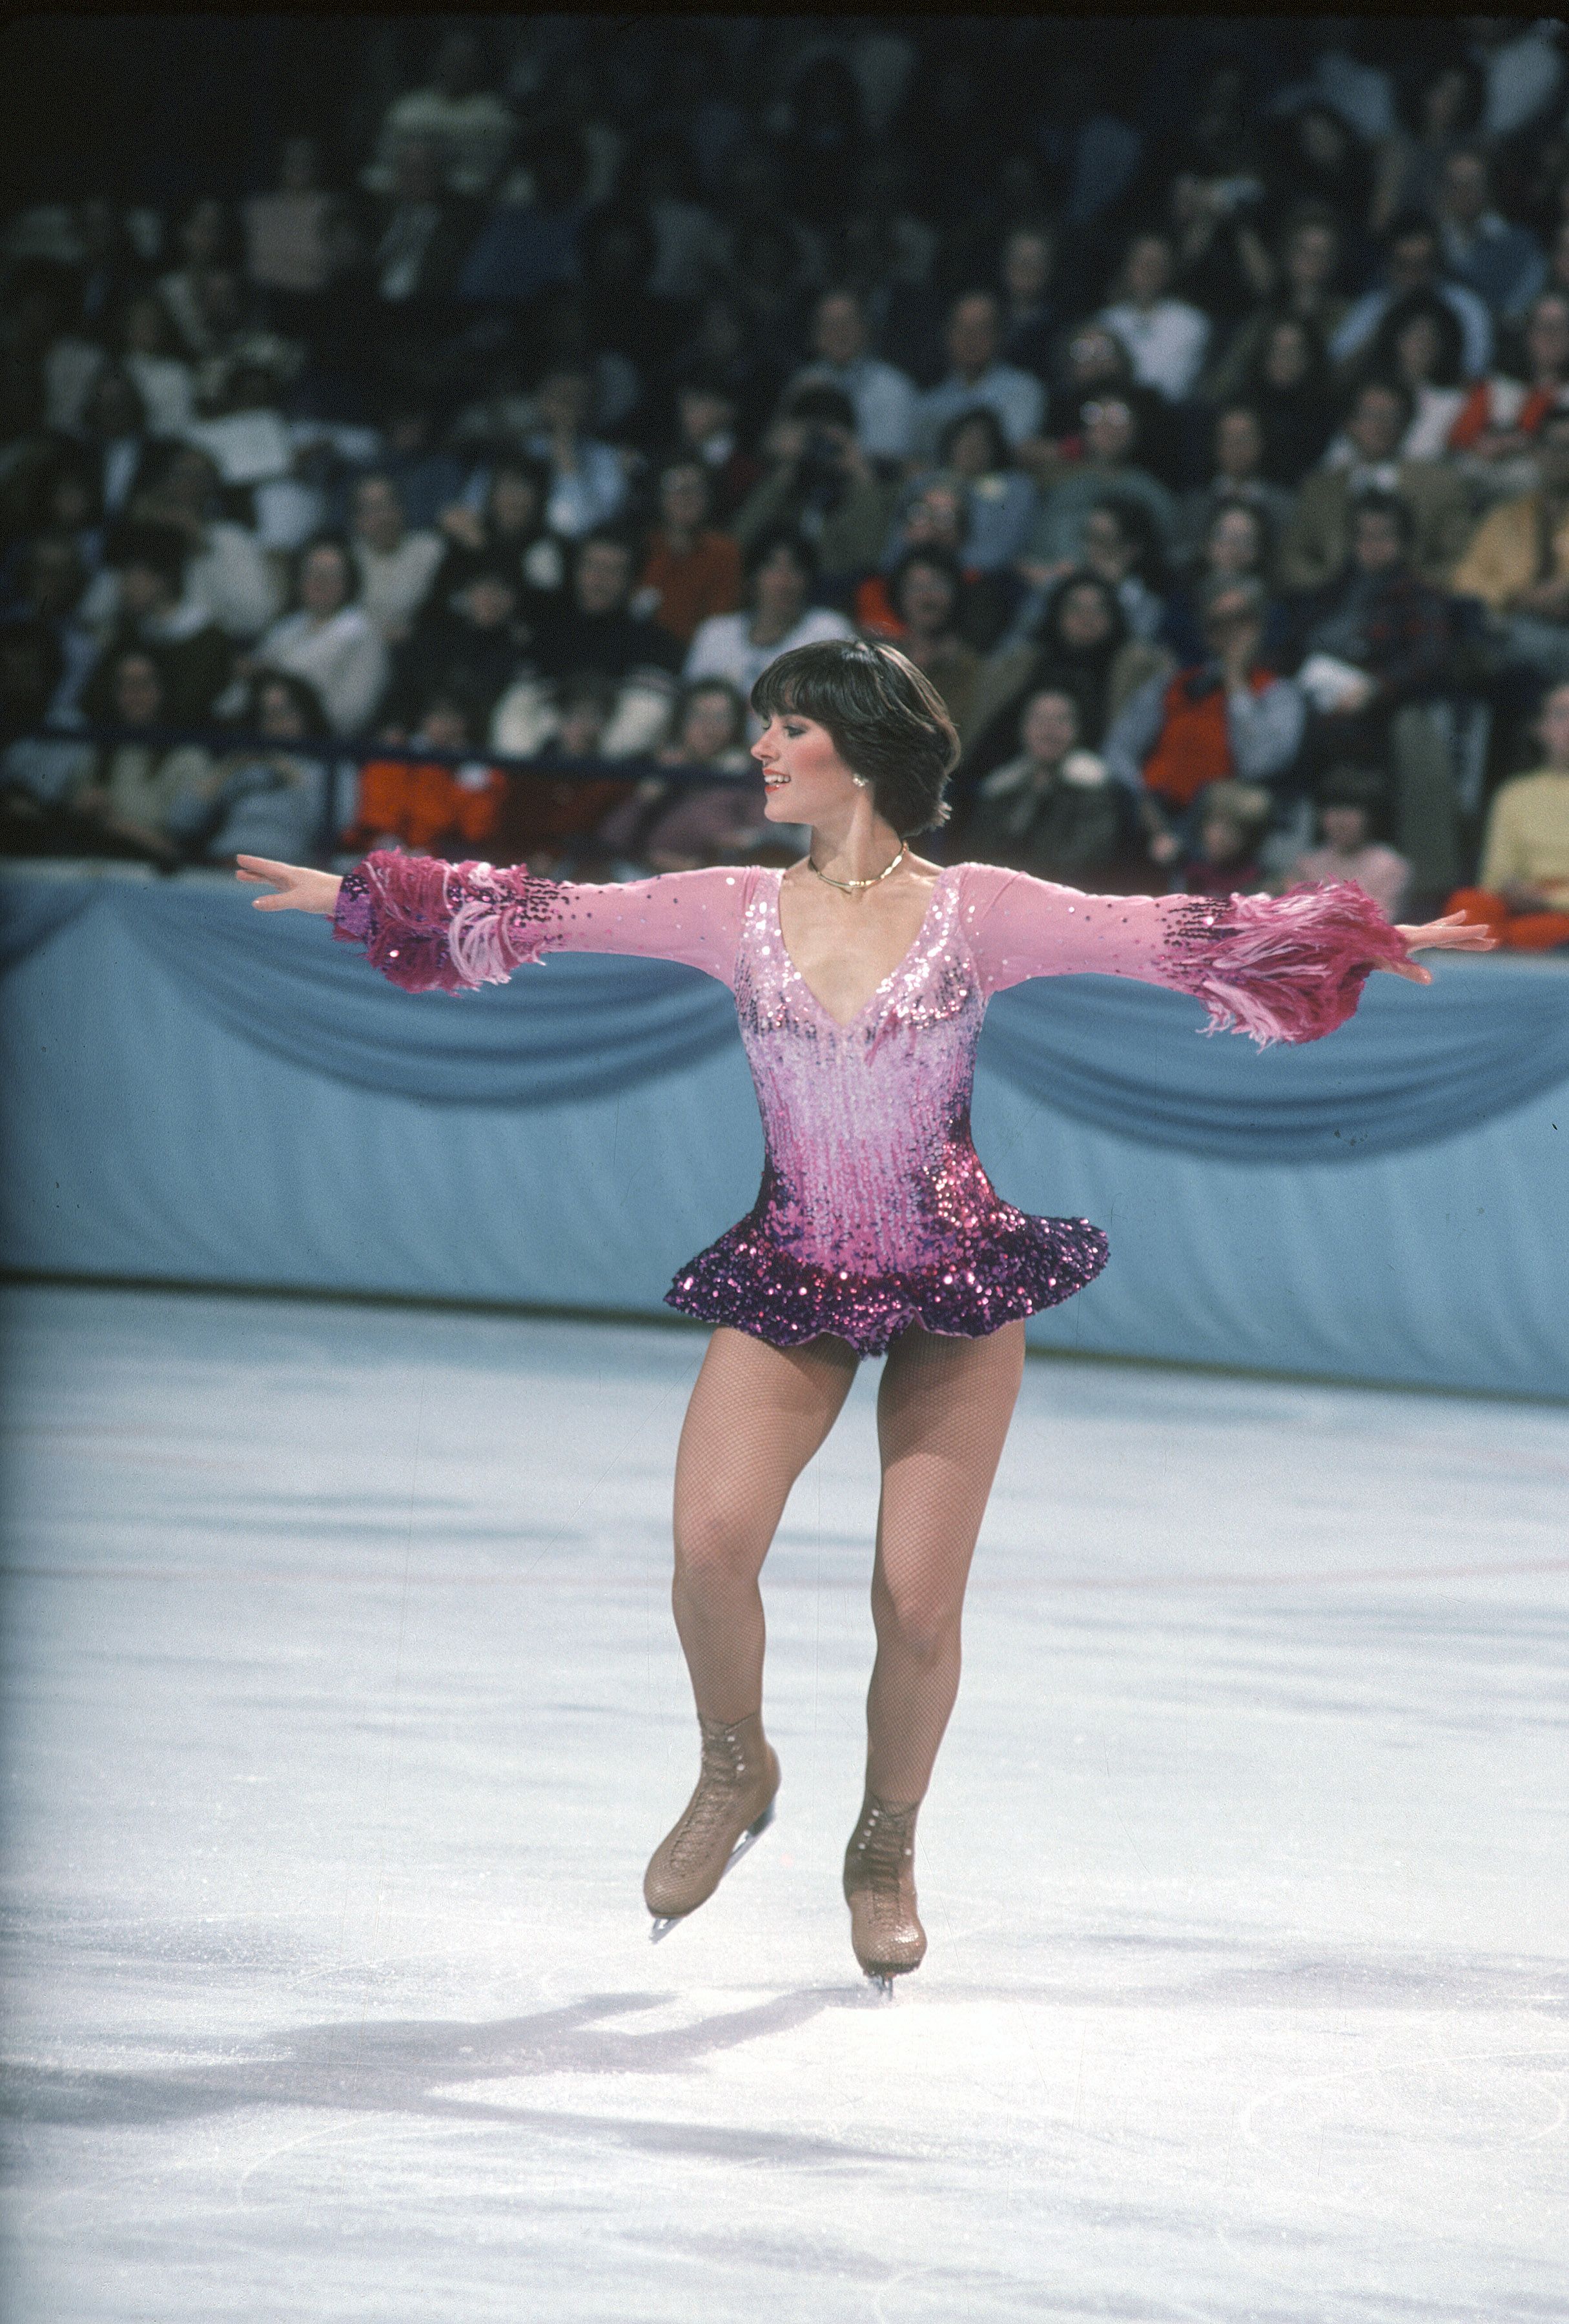 https://hips.hearstapps.com/hmg-prod/images/figure-skater-dorothy-hamill-of-the-united-states-competes-news-photo-1705967265.jpg